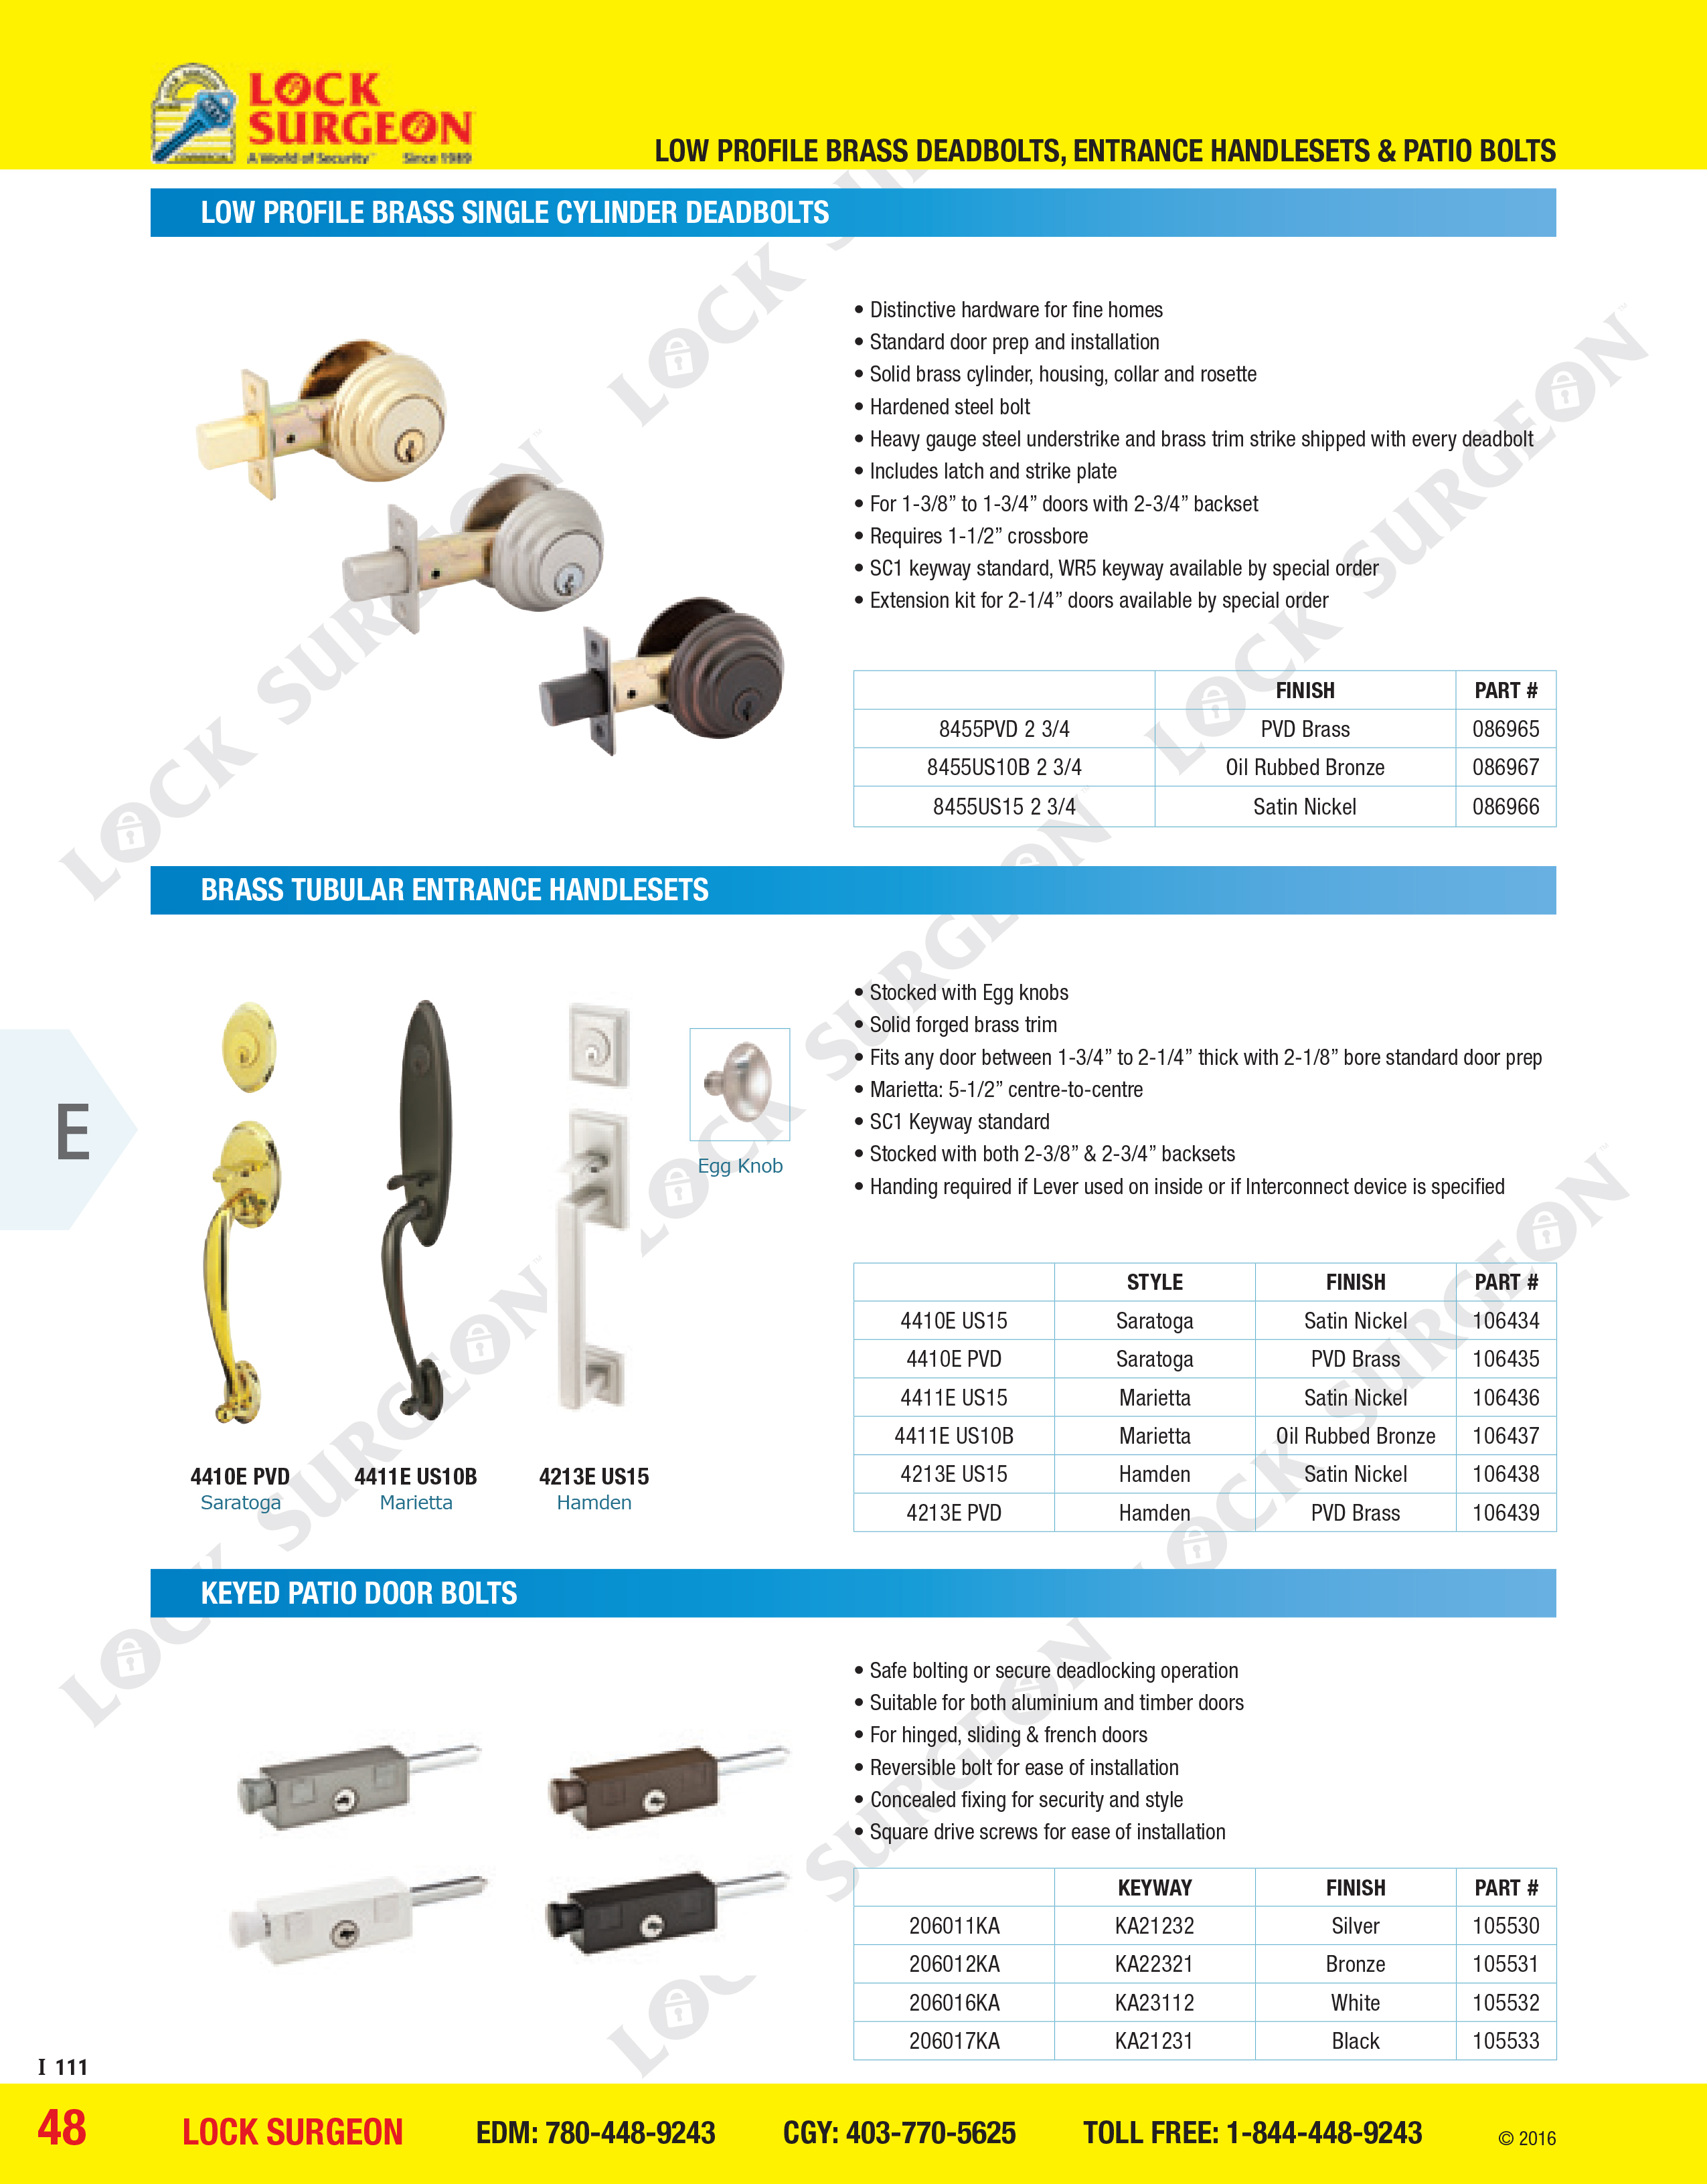 Made for style & function schlage deadbolt & handles & Secondary locking Patio pins at Lock Surgeon.